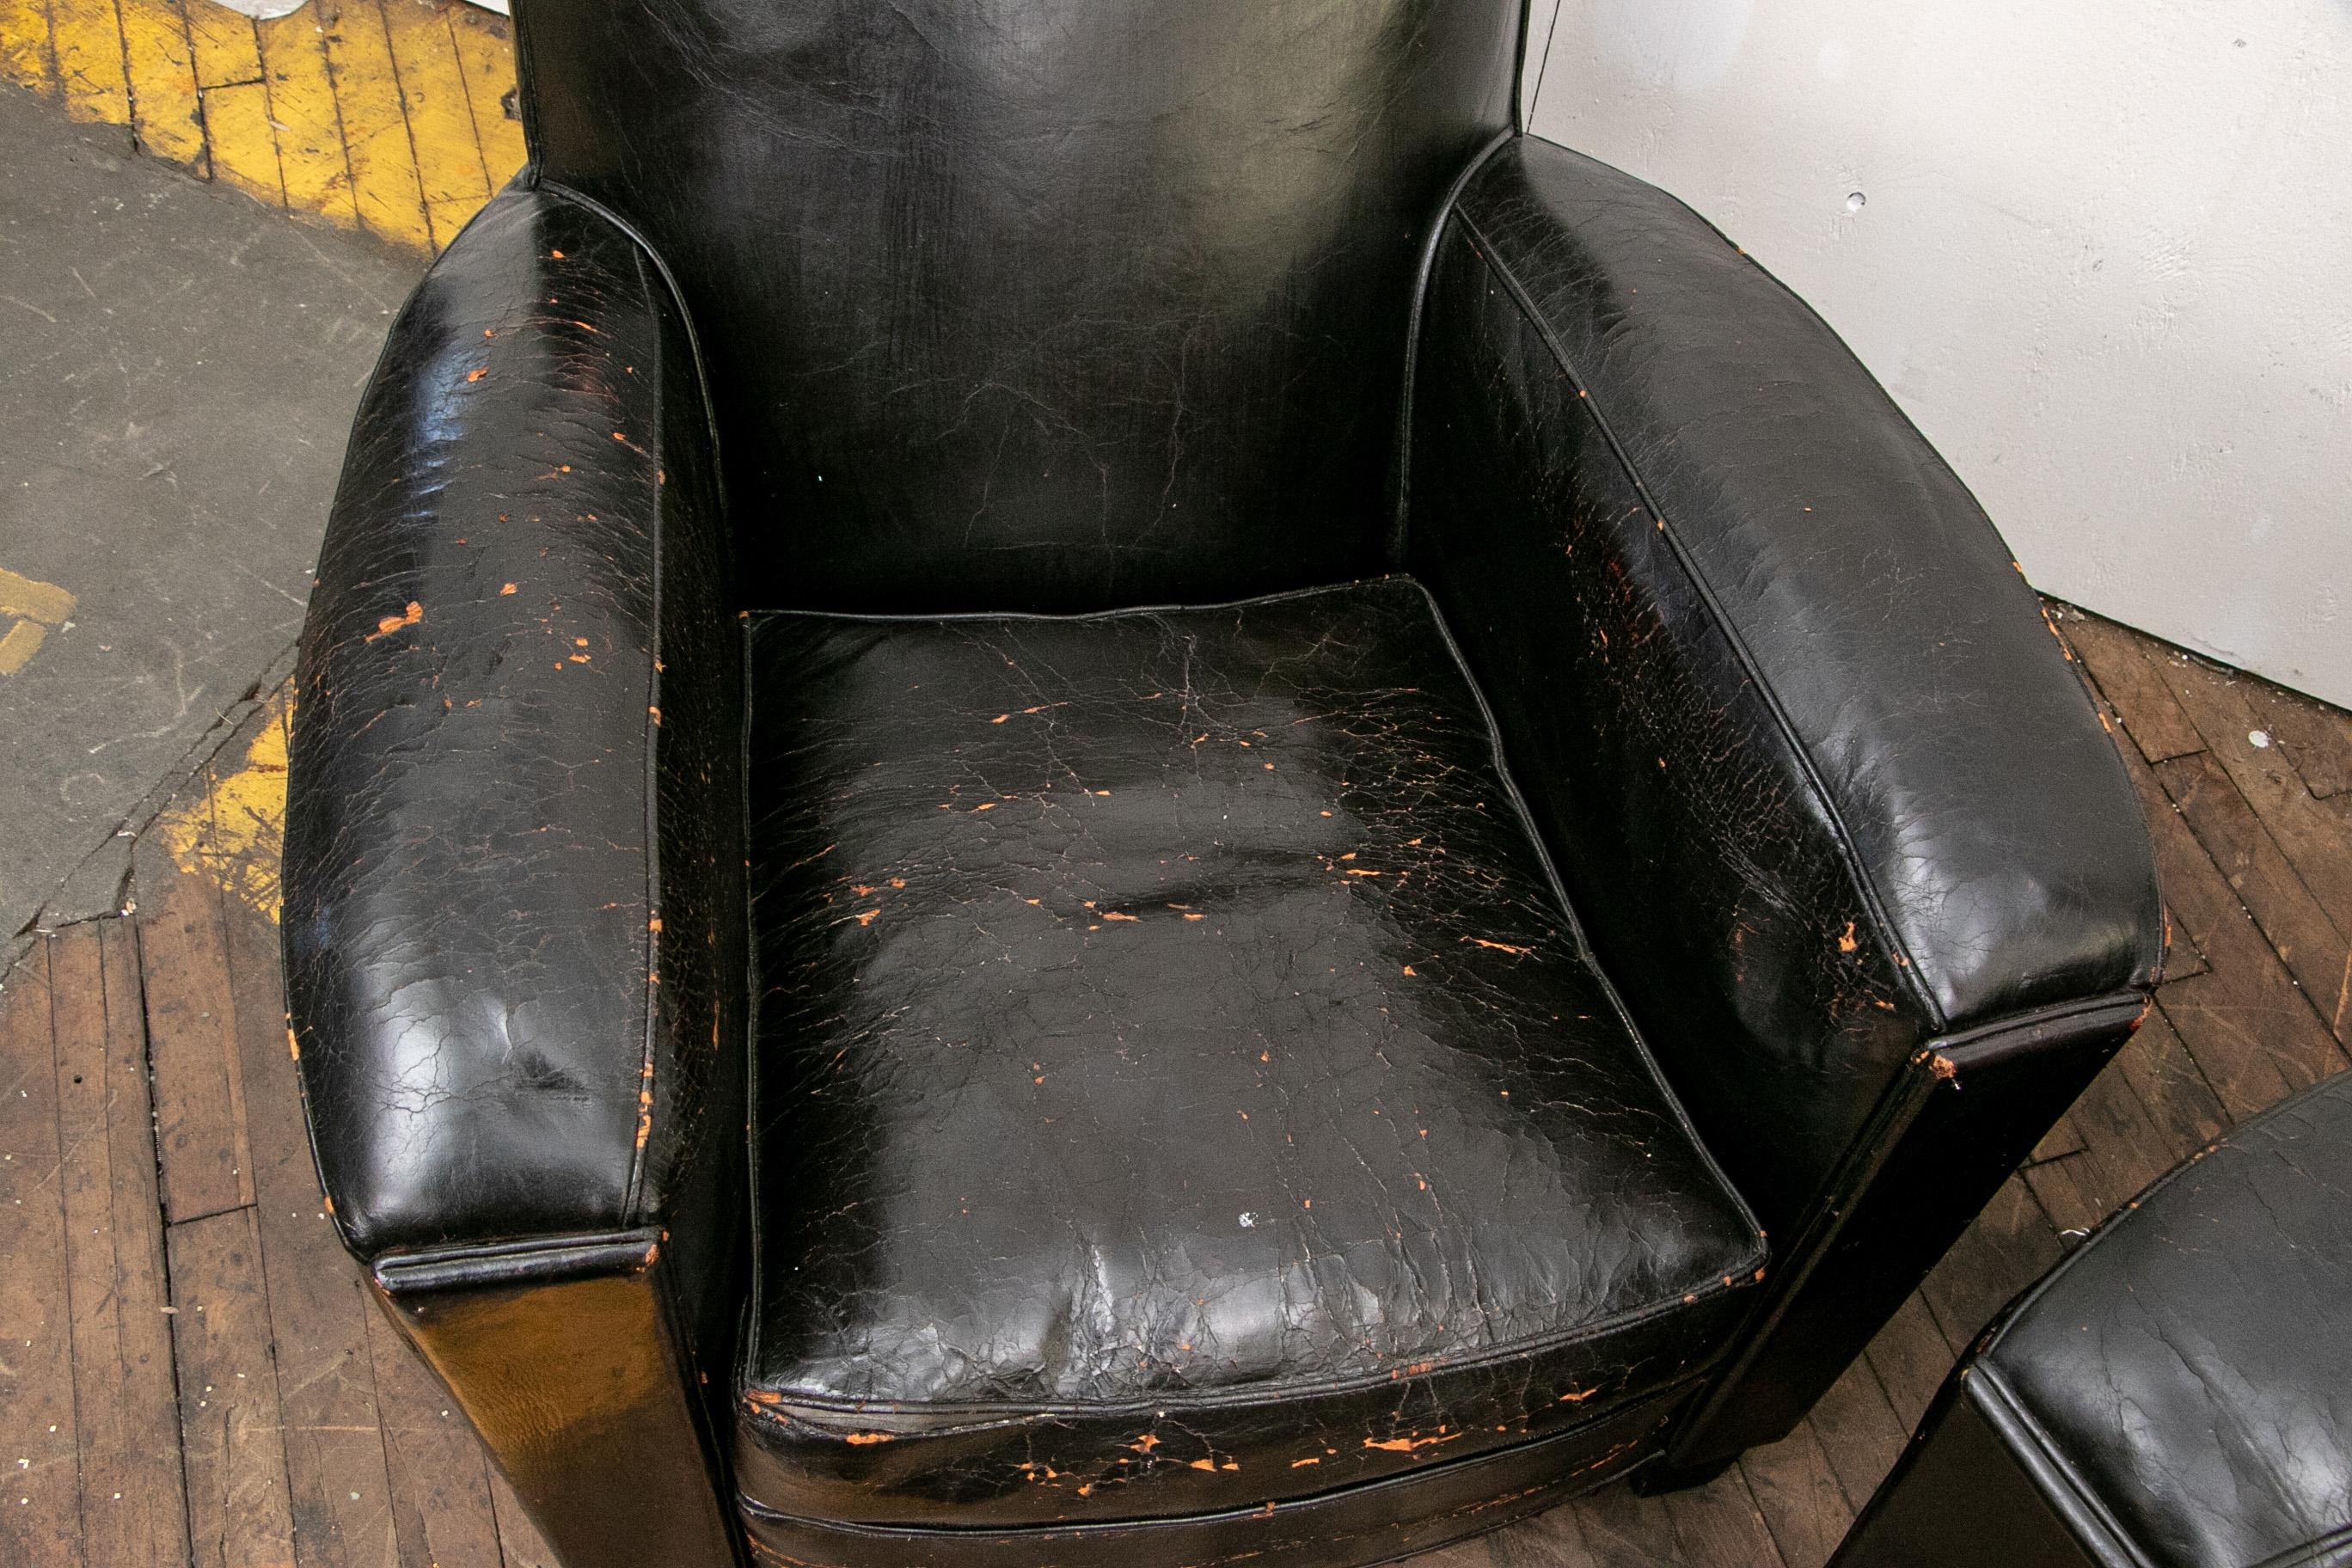 20th Century Pair of French Leather Art Deco Club Chairs